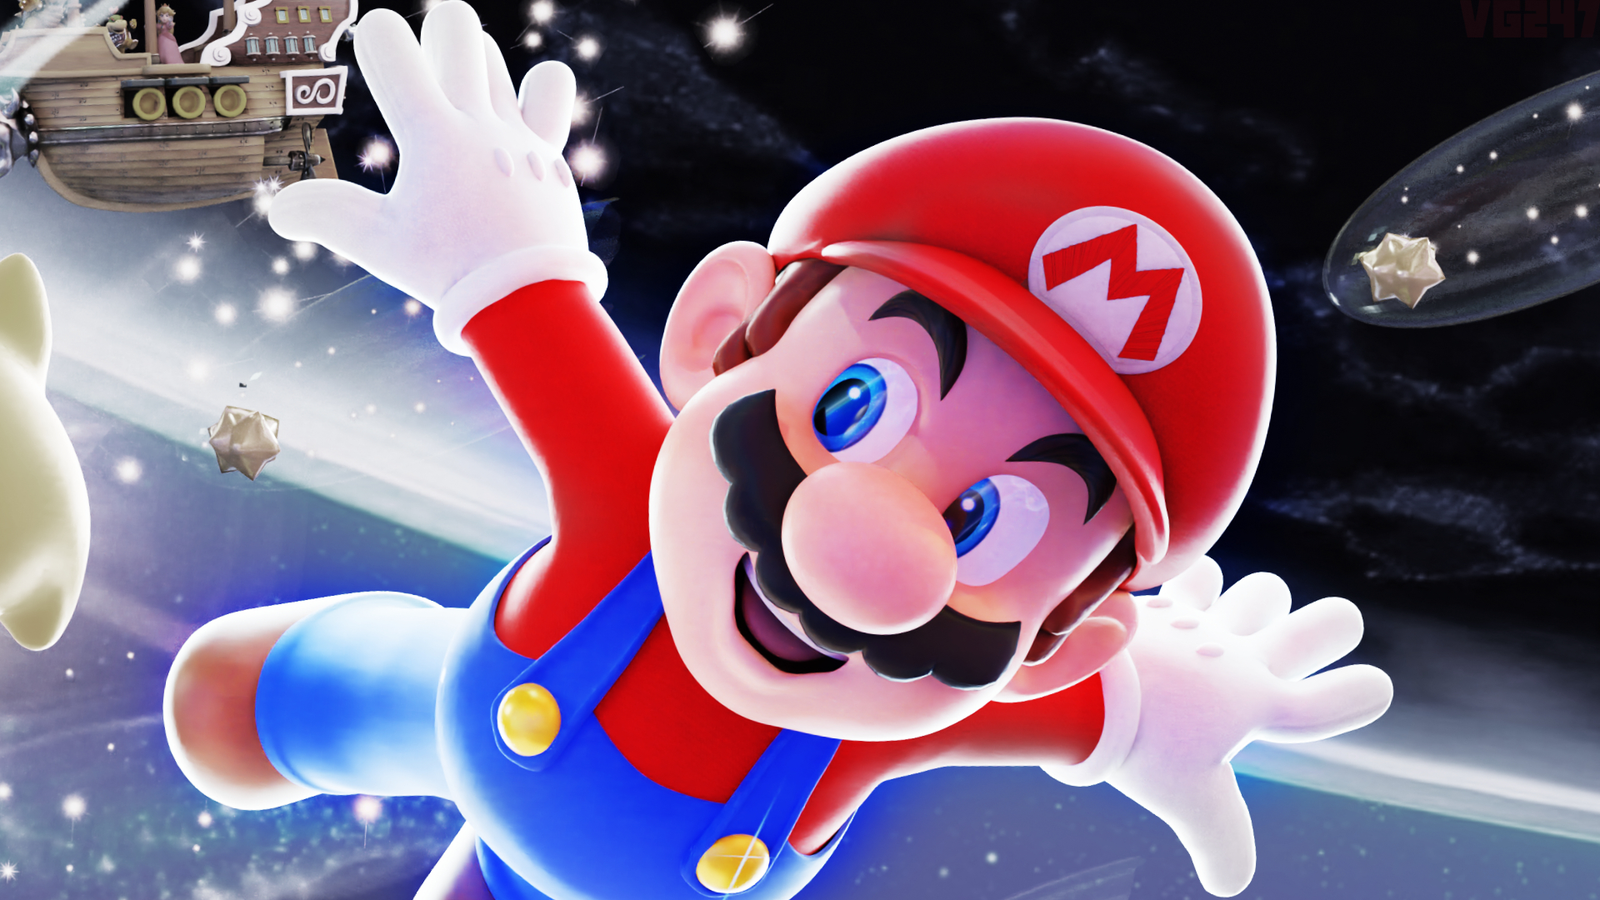 15 years later, Super Mario Galaxy is still the series' most entry | VG247